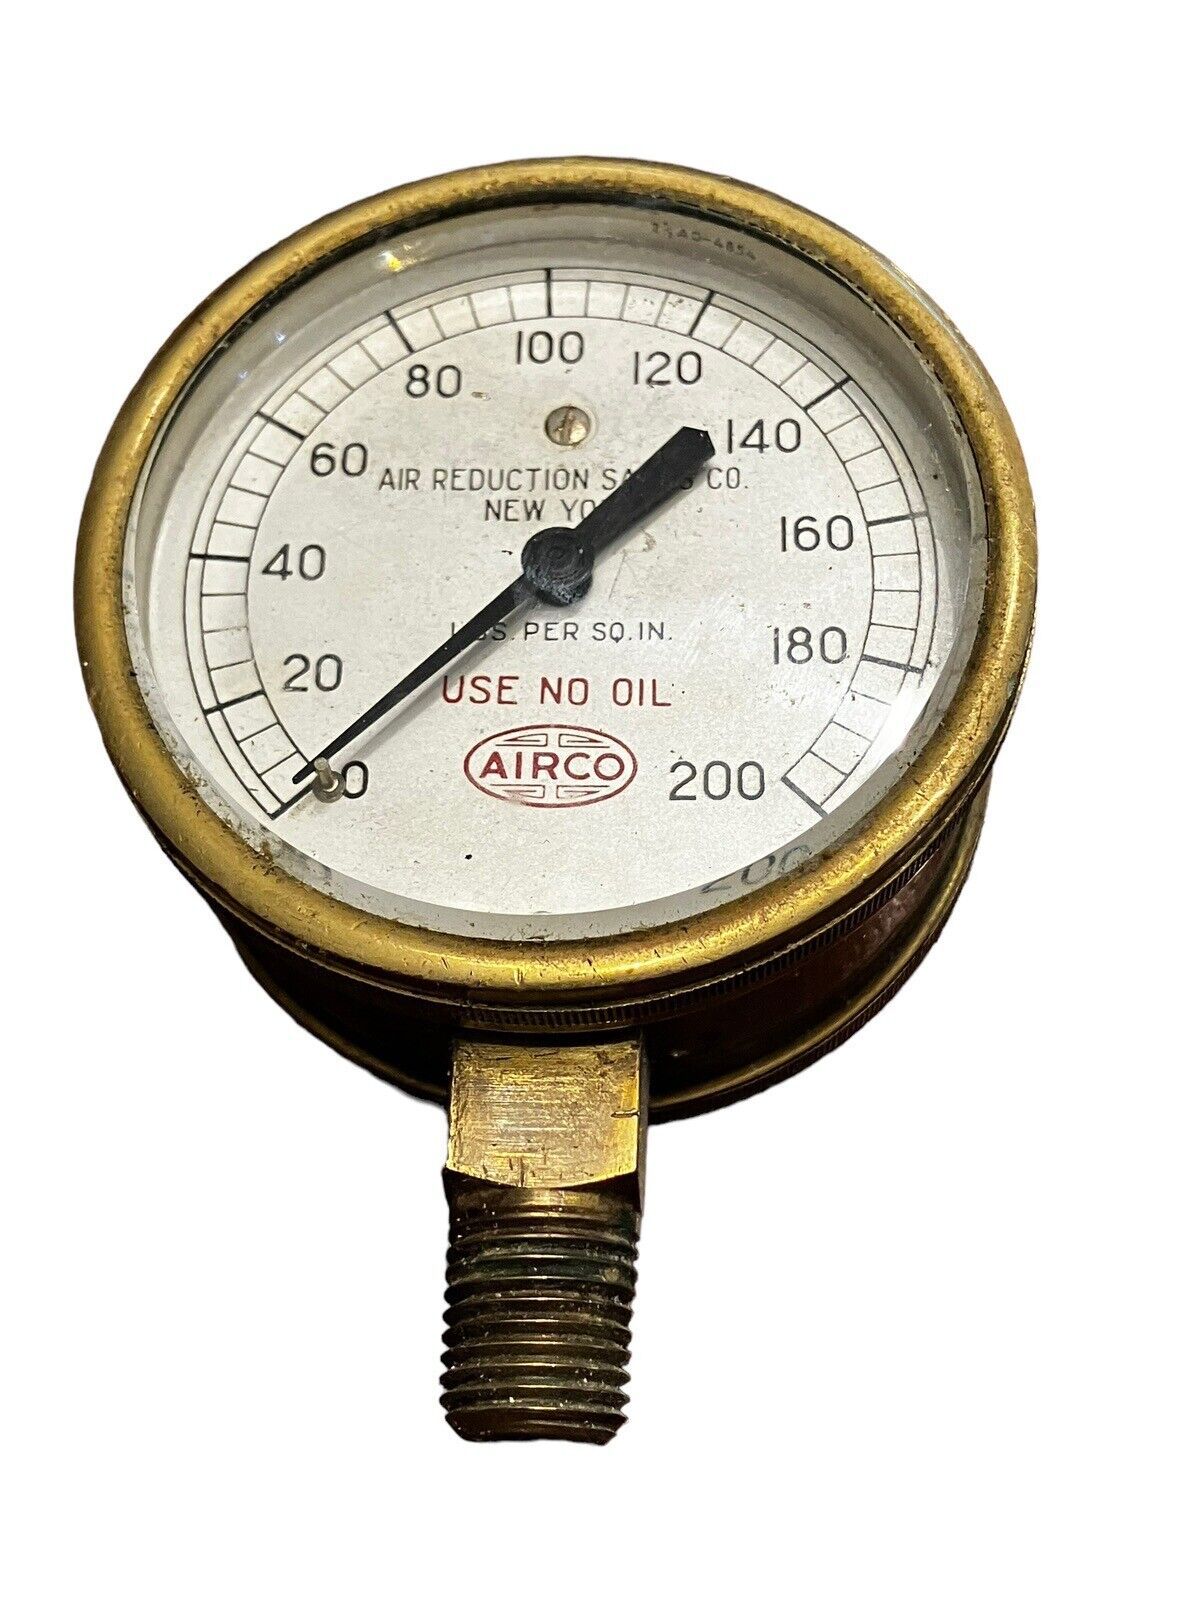 Airco Air Reduction Sales Co New York Brass Gauge Industrial Steampunk Vintage